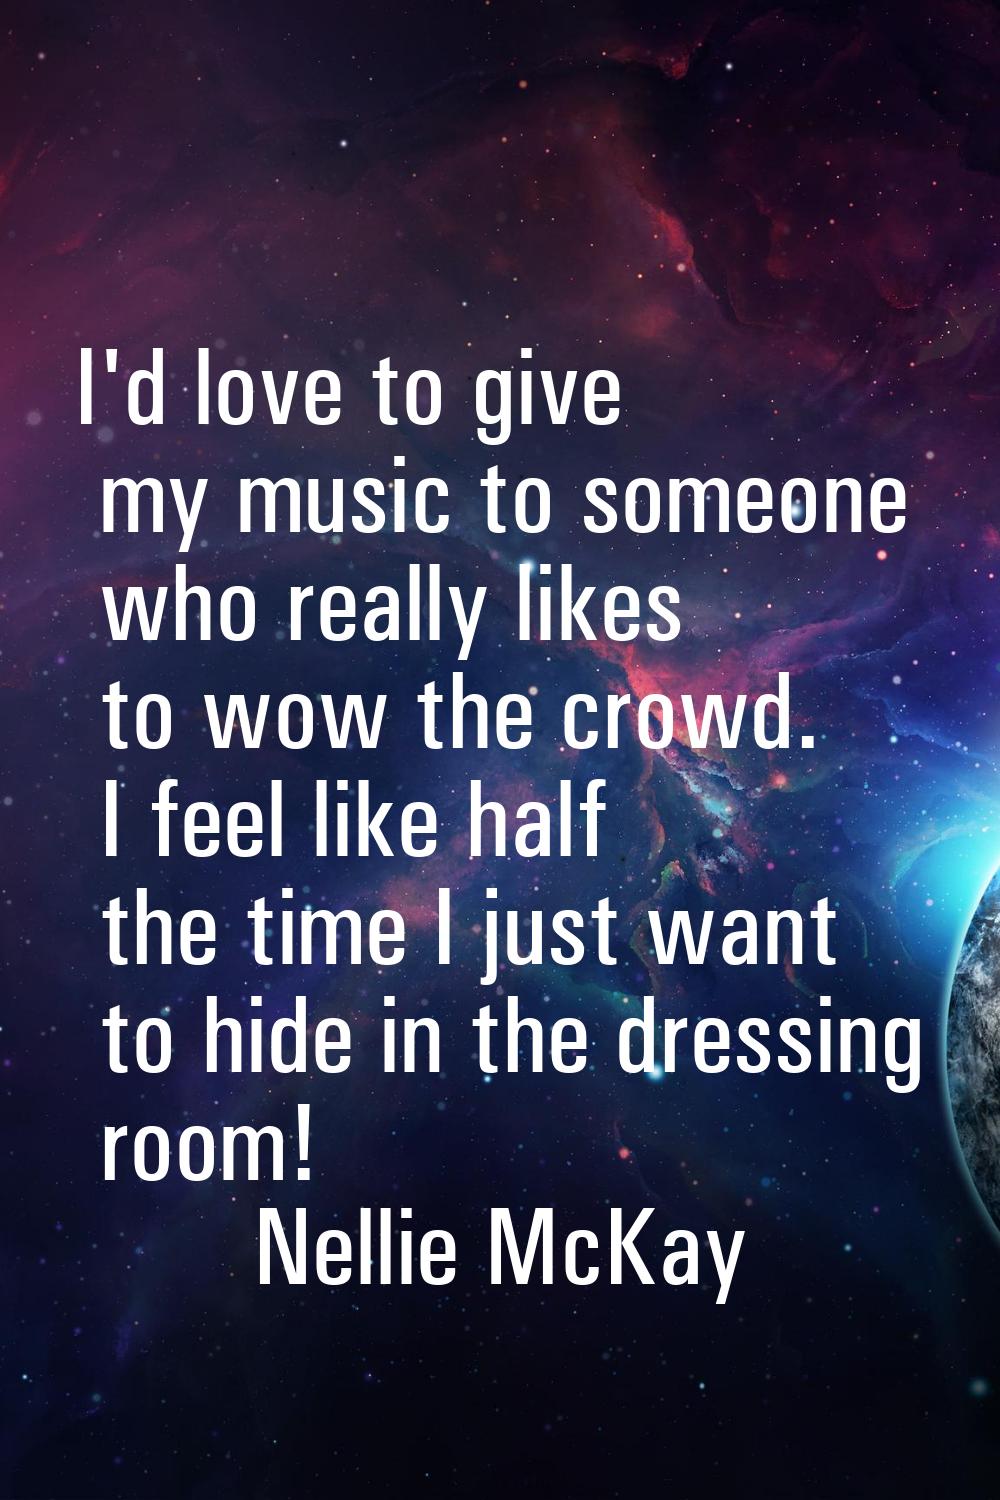 I'd love to give my music to someone who really likes to wow the crowd. I feel like half the time I